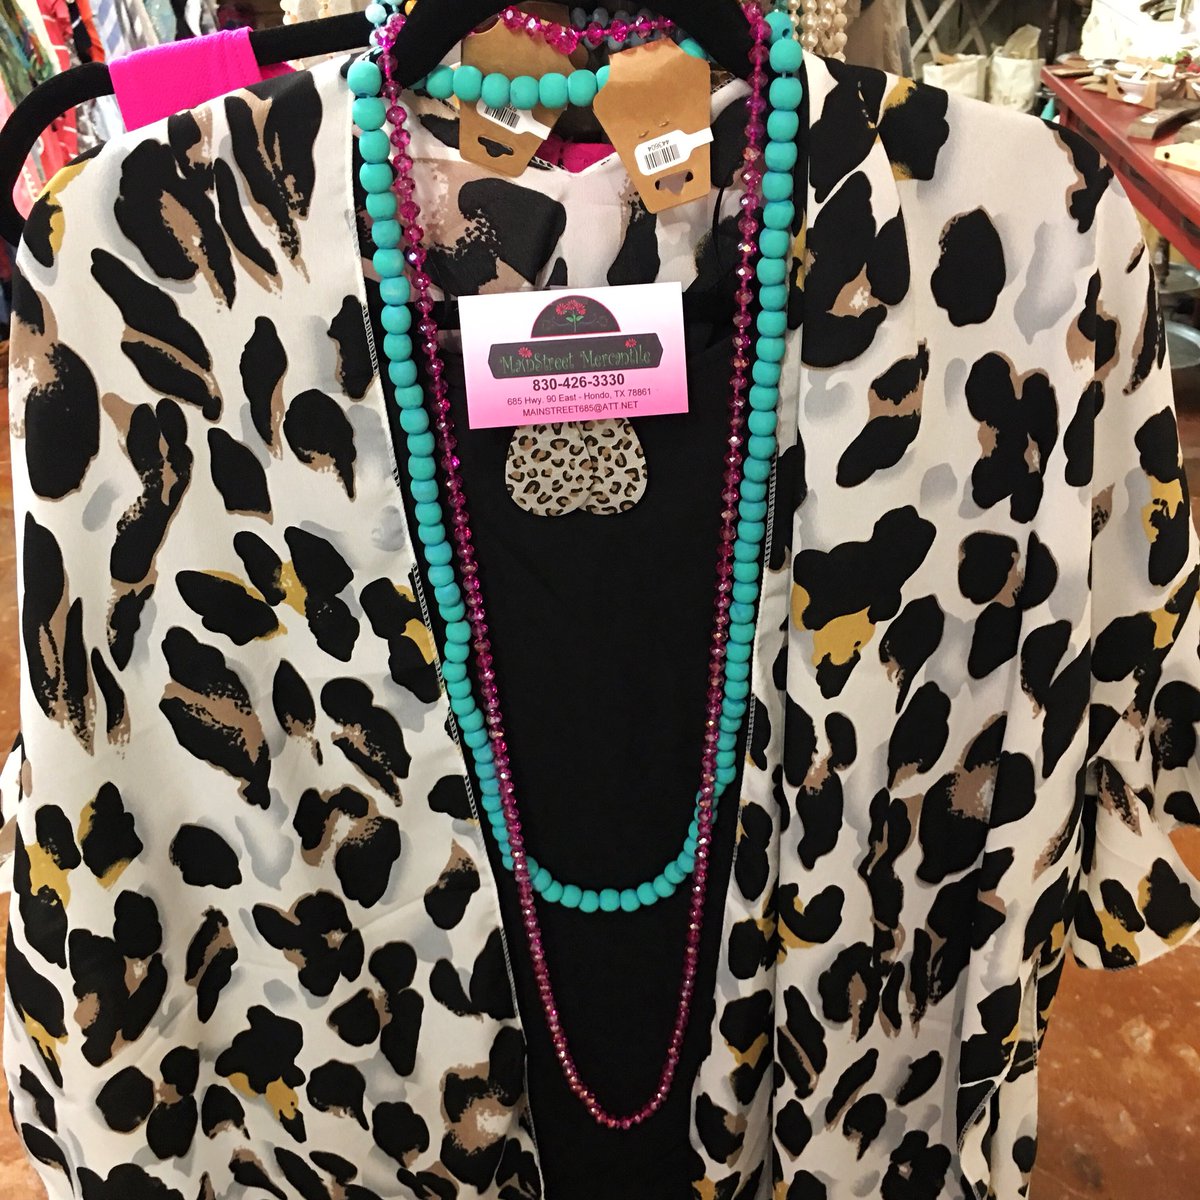 Meow! This on trend leopard kimono has ruffle sleeves and is ready for a long weekend 🖤#effortlessStyle #fashionista #effortlesschic #styleinspiration #visualcrush #wiwt #wearitliveit #instastyle #ShopGreatGifts #HondoTx #mSmHondo